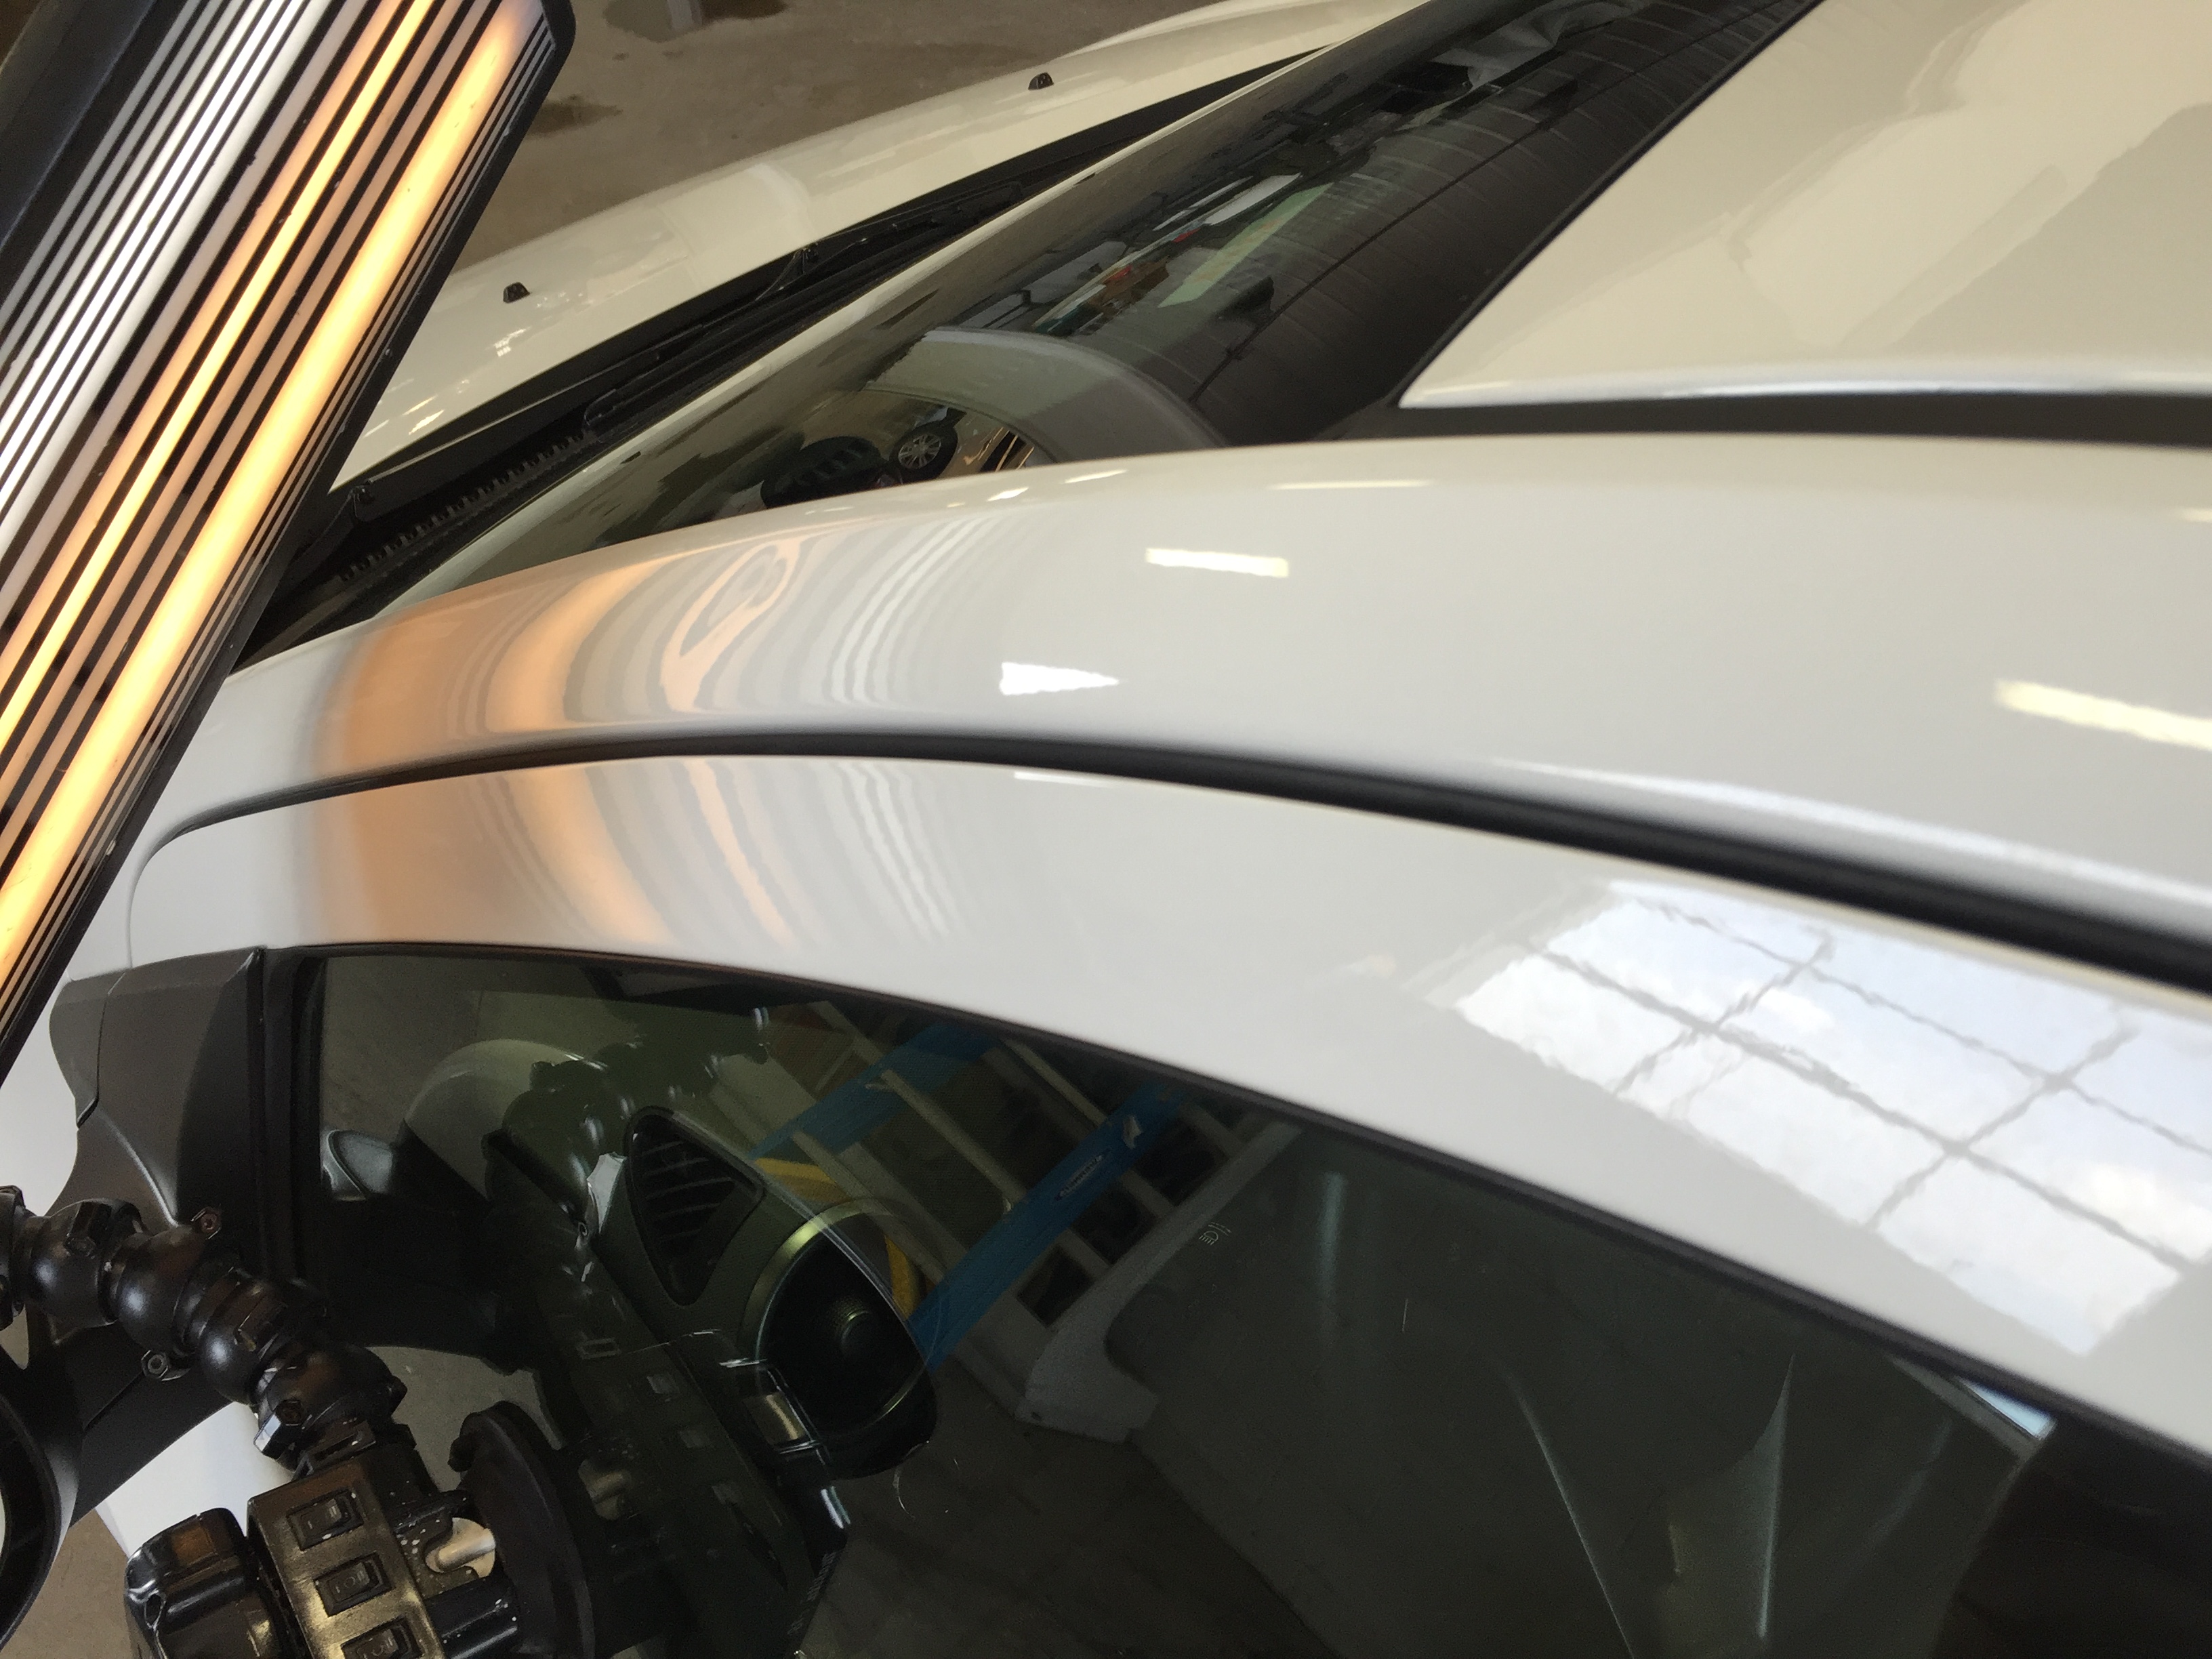 2015 Chevy Sonic, Dent Removal on PIllar, Images, Hail Damage, Paintless Dent Removal, Springfield, IL, https://217dent.com